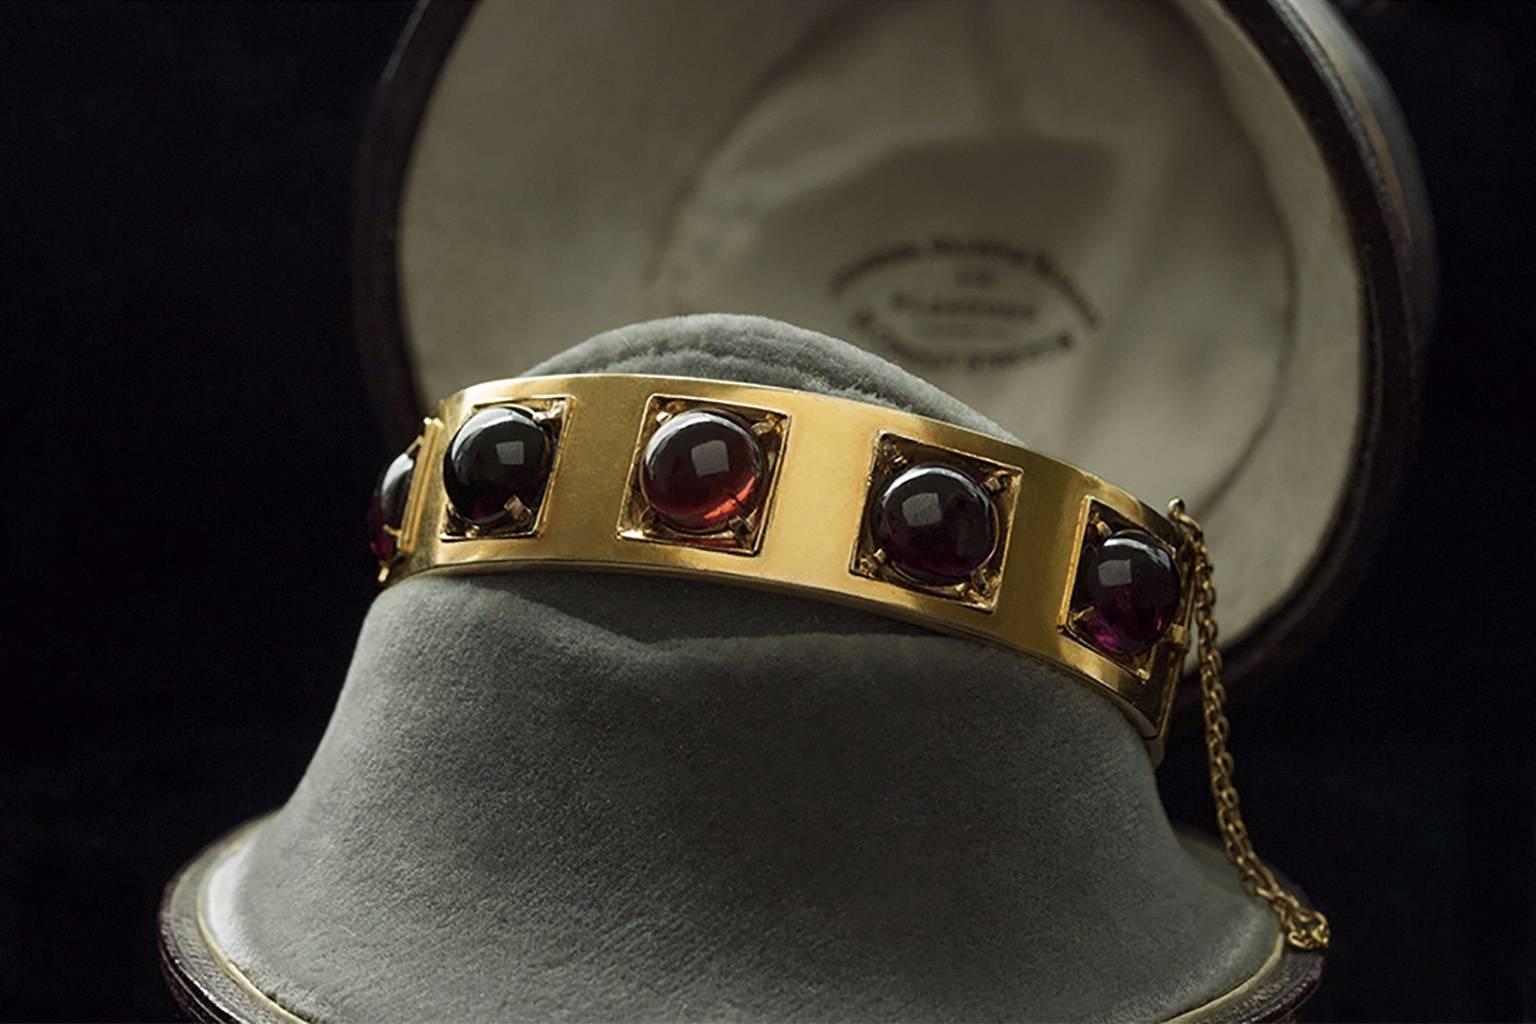 Victorian gold bangle with 5 circular-cut garnet cabochons. The bangle is 14k yellow gold. Each cabochon somewhat varies in its hue. This piece is great for stacking, or looks great on its own. The hinge is secure, and shuts firmly. (safety chain